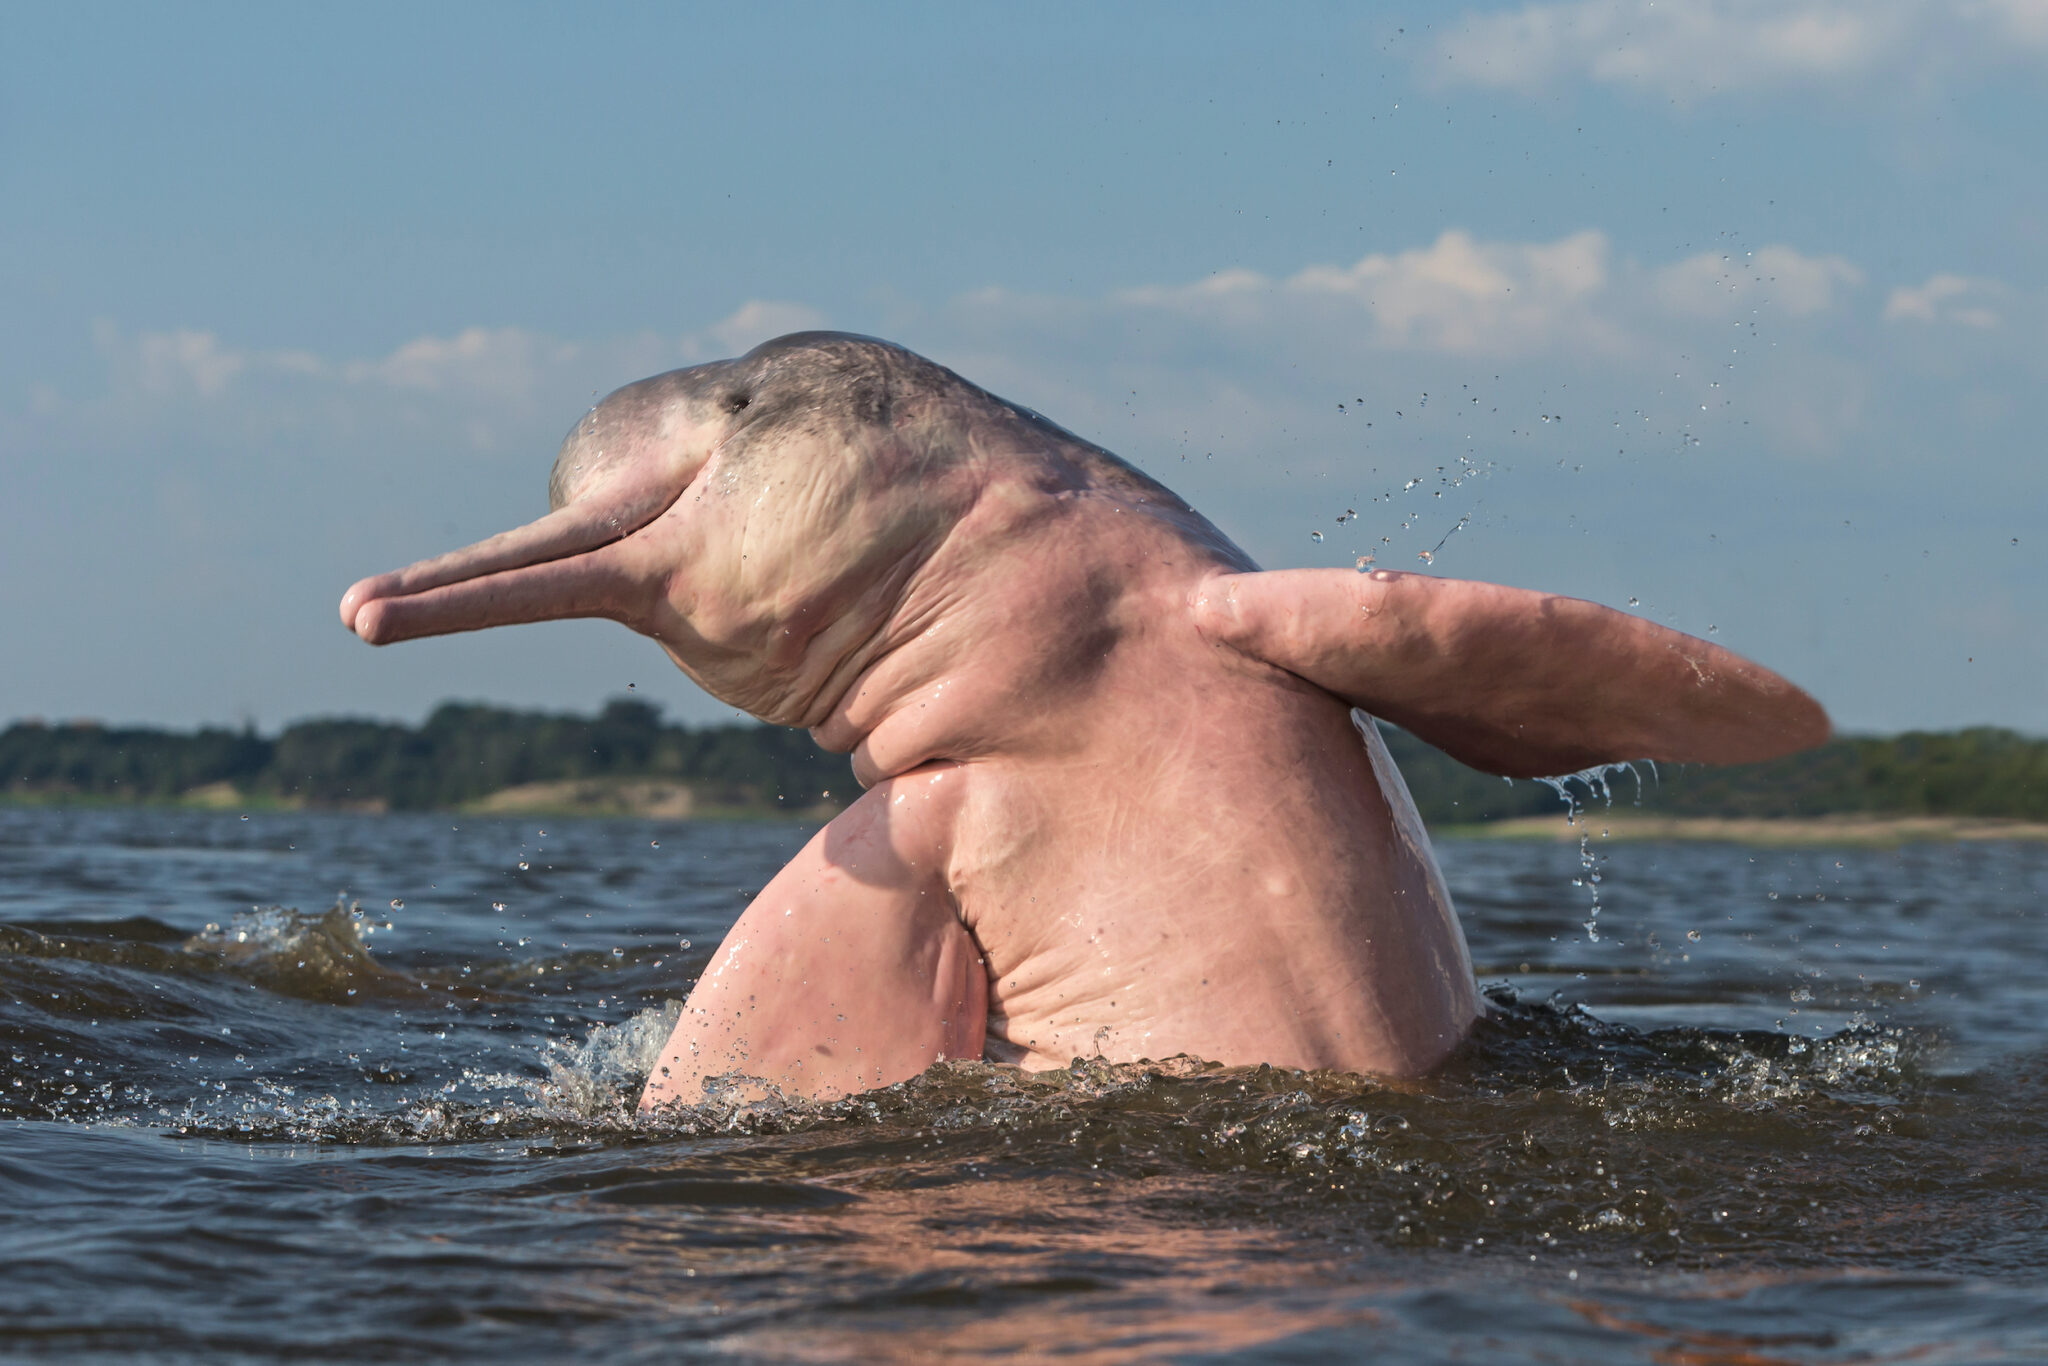 Amazon pink river dolphins are freshwater dolphins found throughout the Amazon river basins in South America